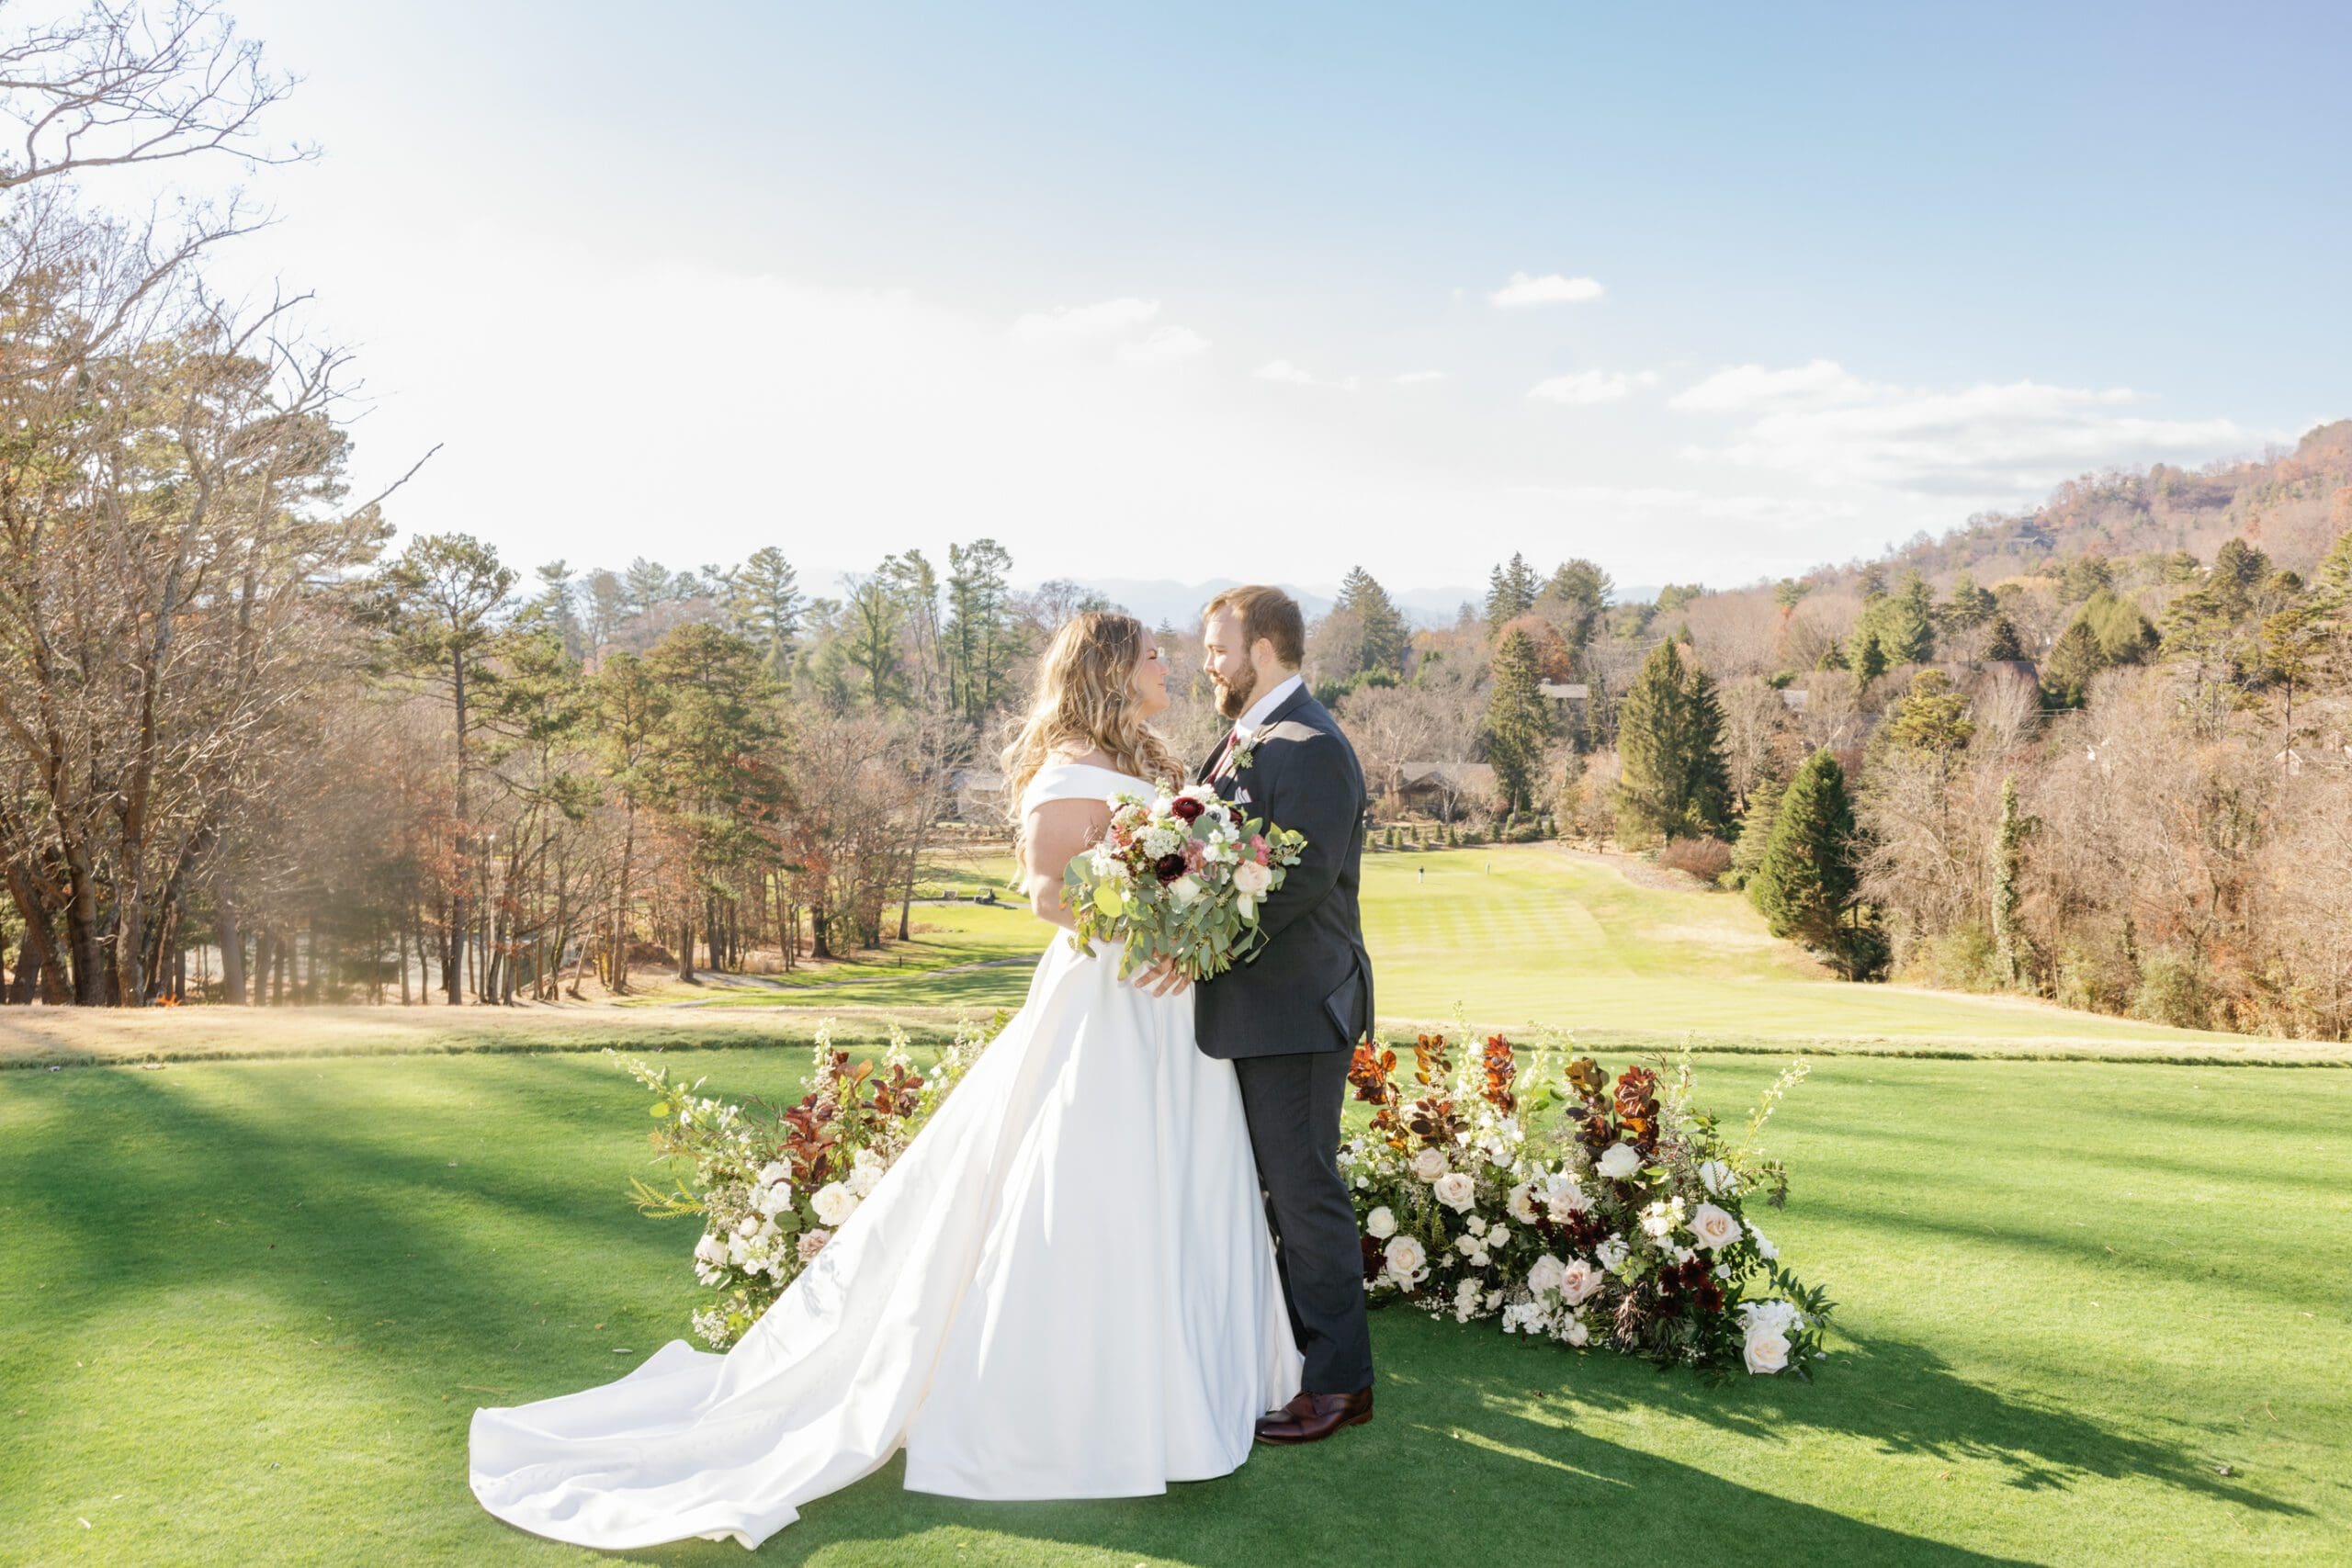 A fall wedding at the Country Club of Asheville, with a bride and groom kissing on the golf course.